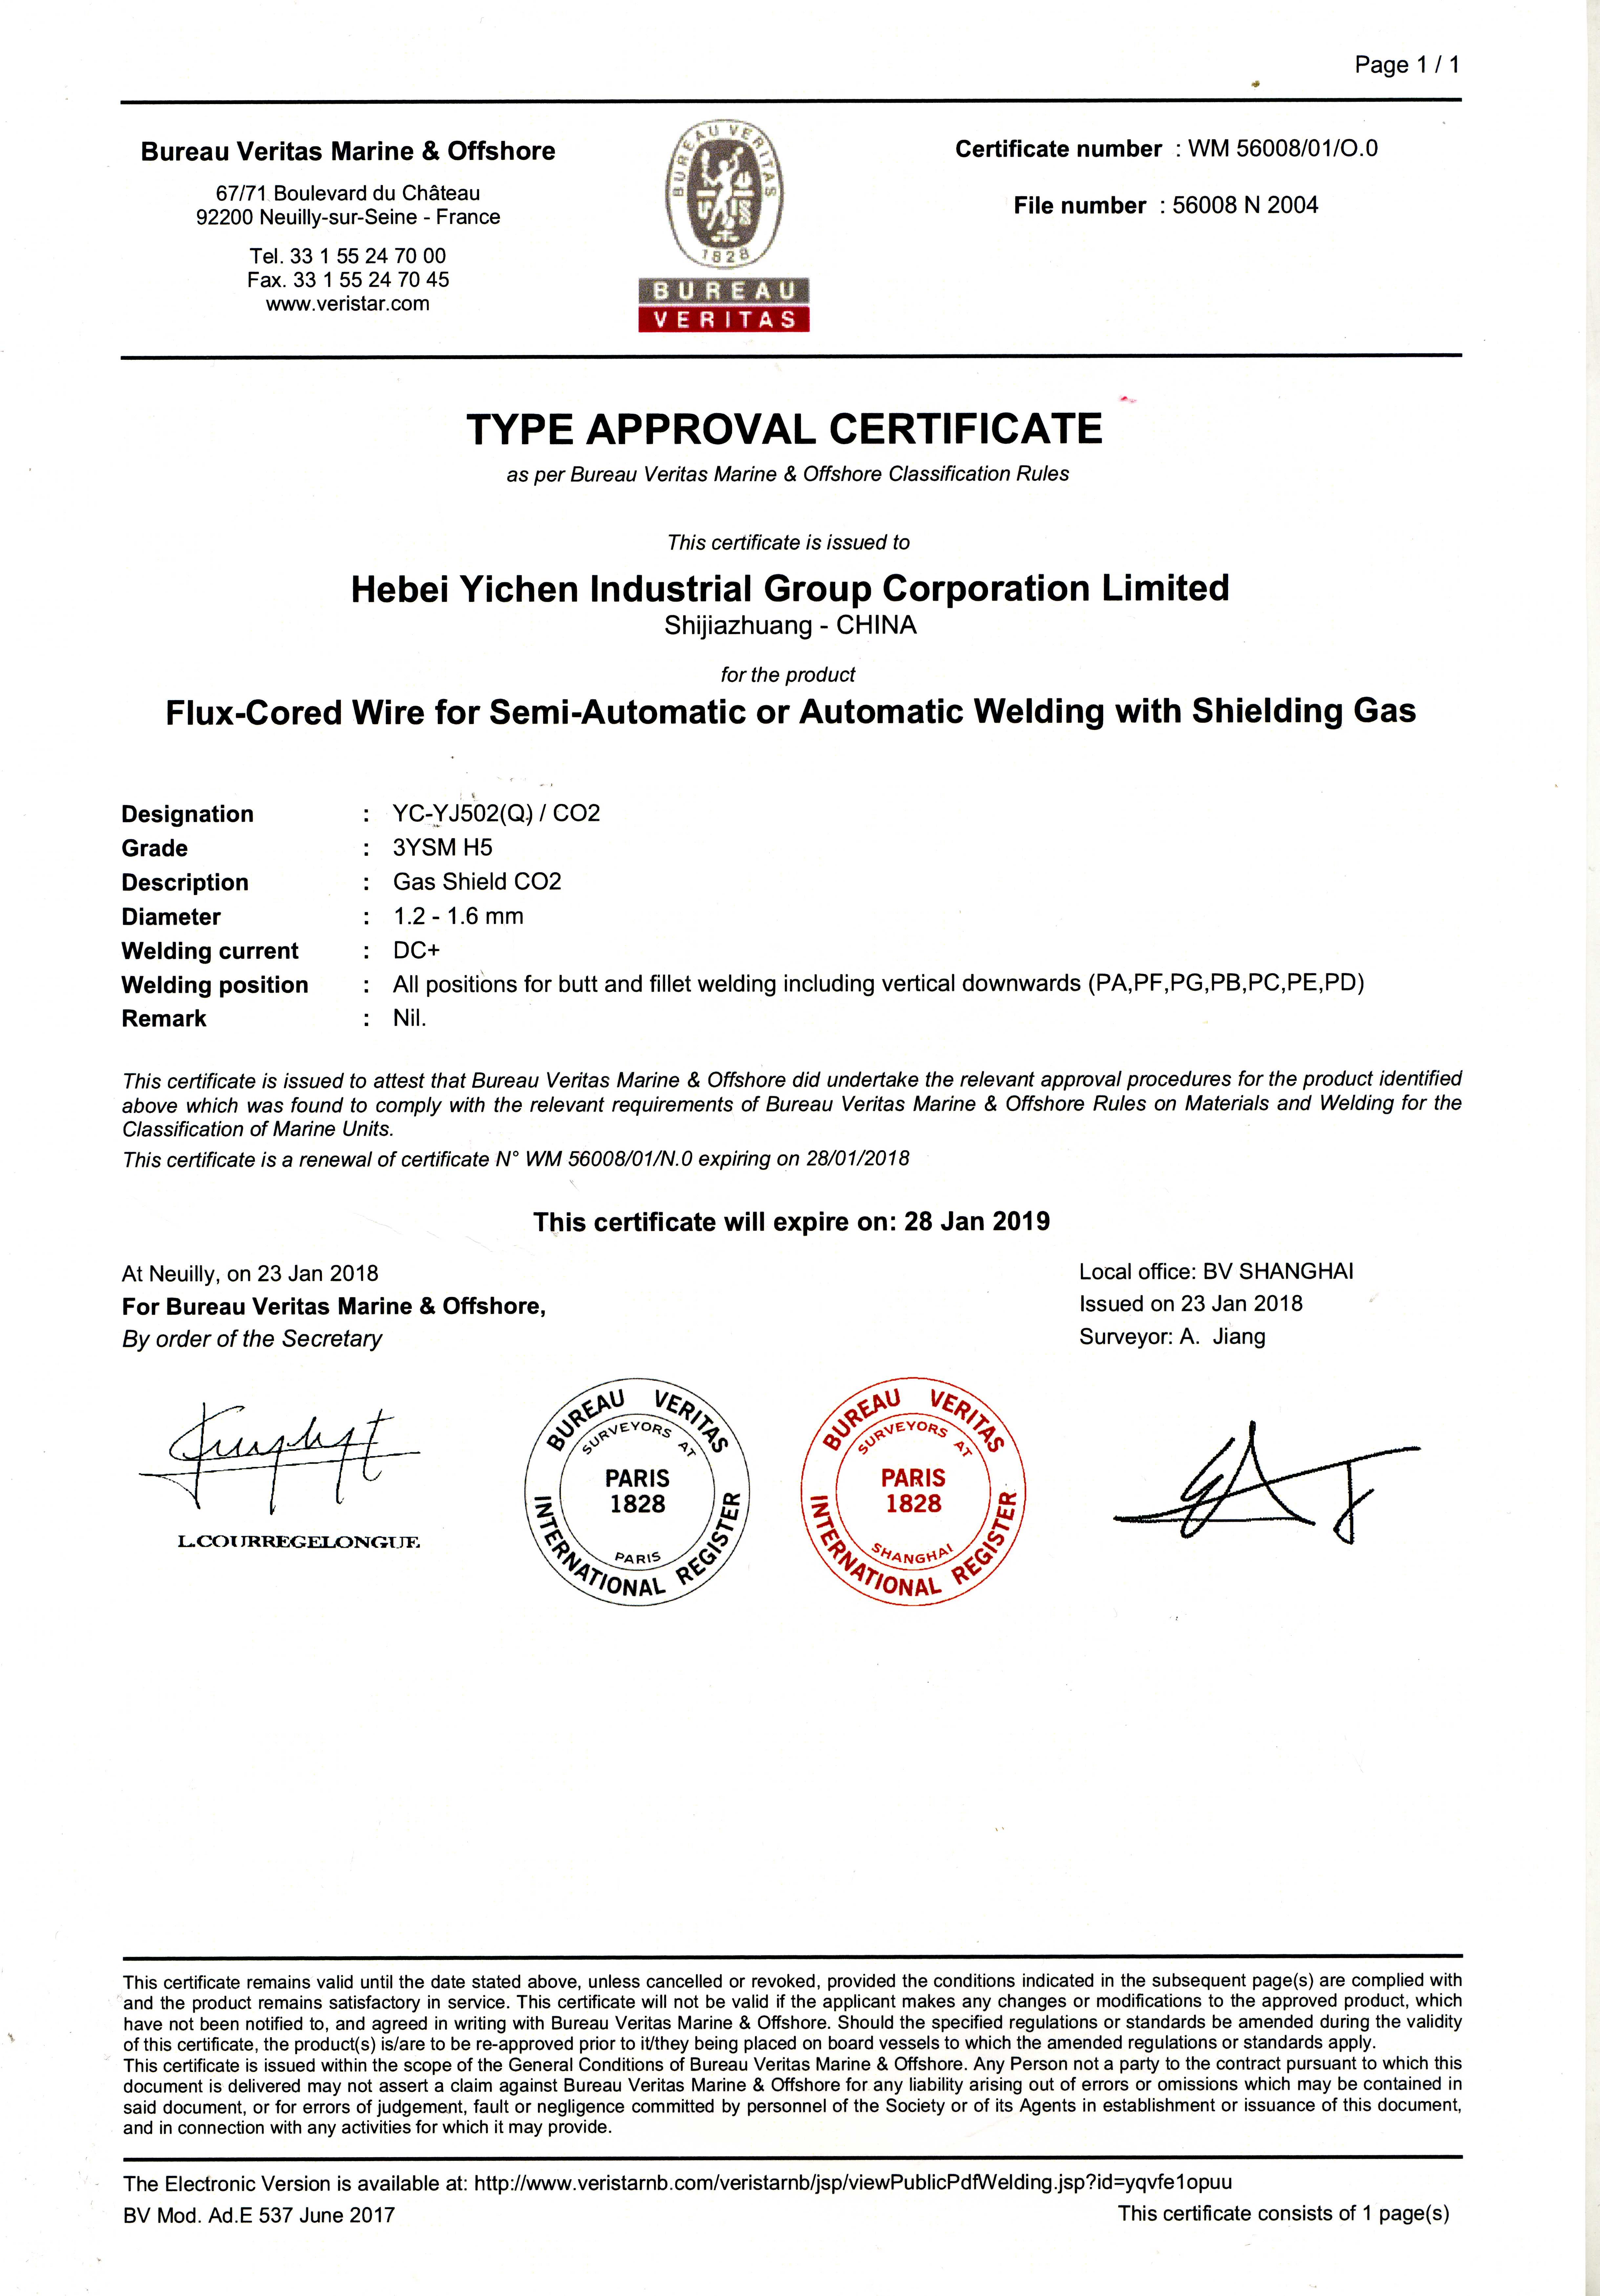 Updated ISO9001 Certificate of Approval